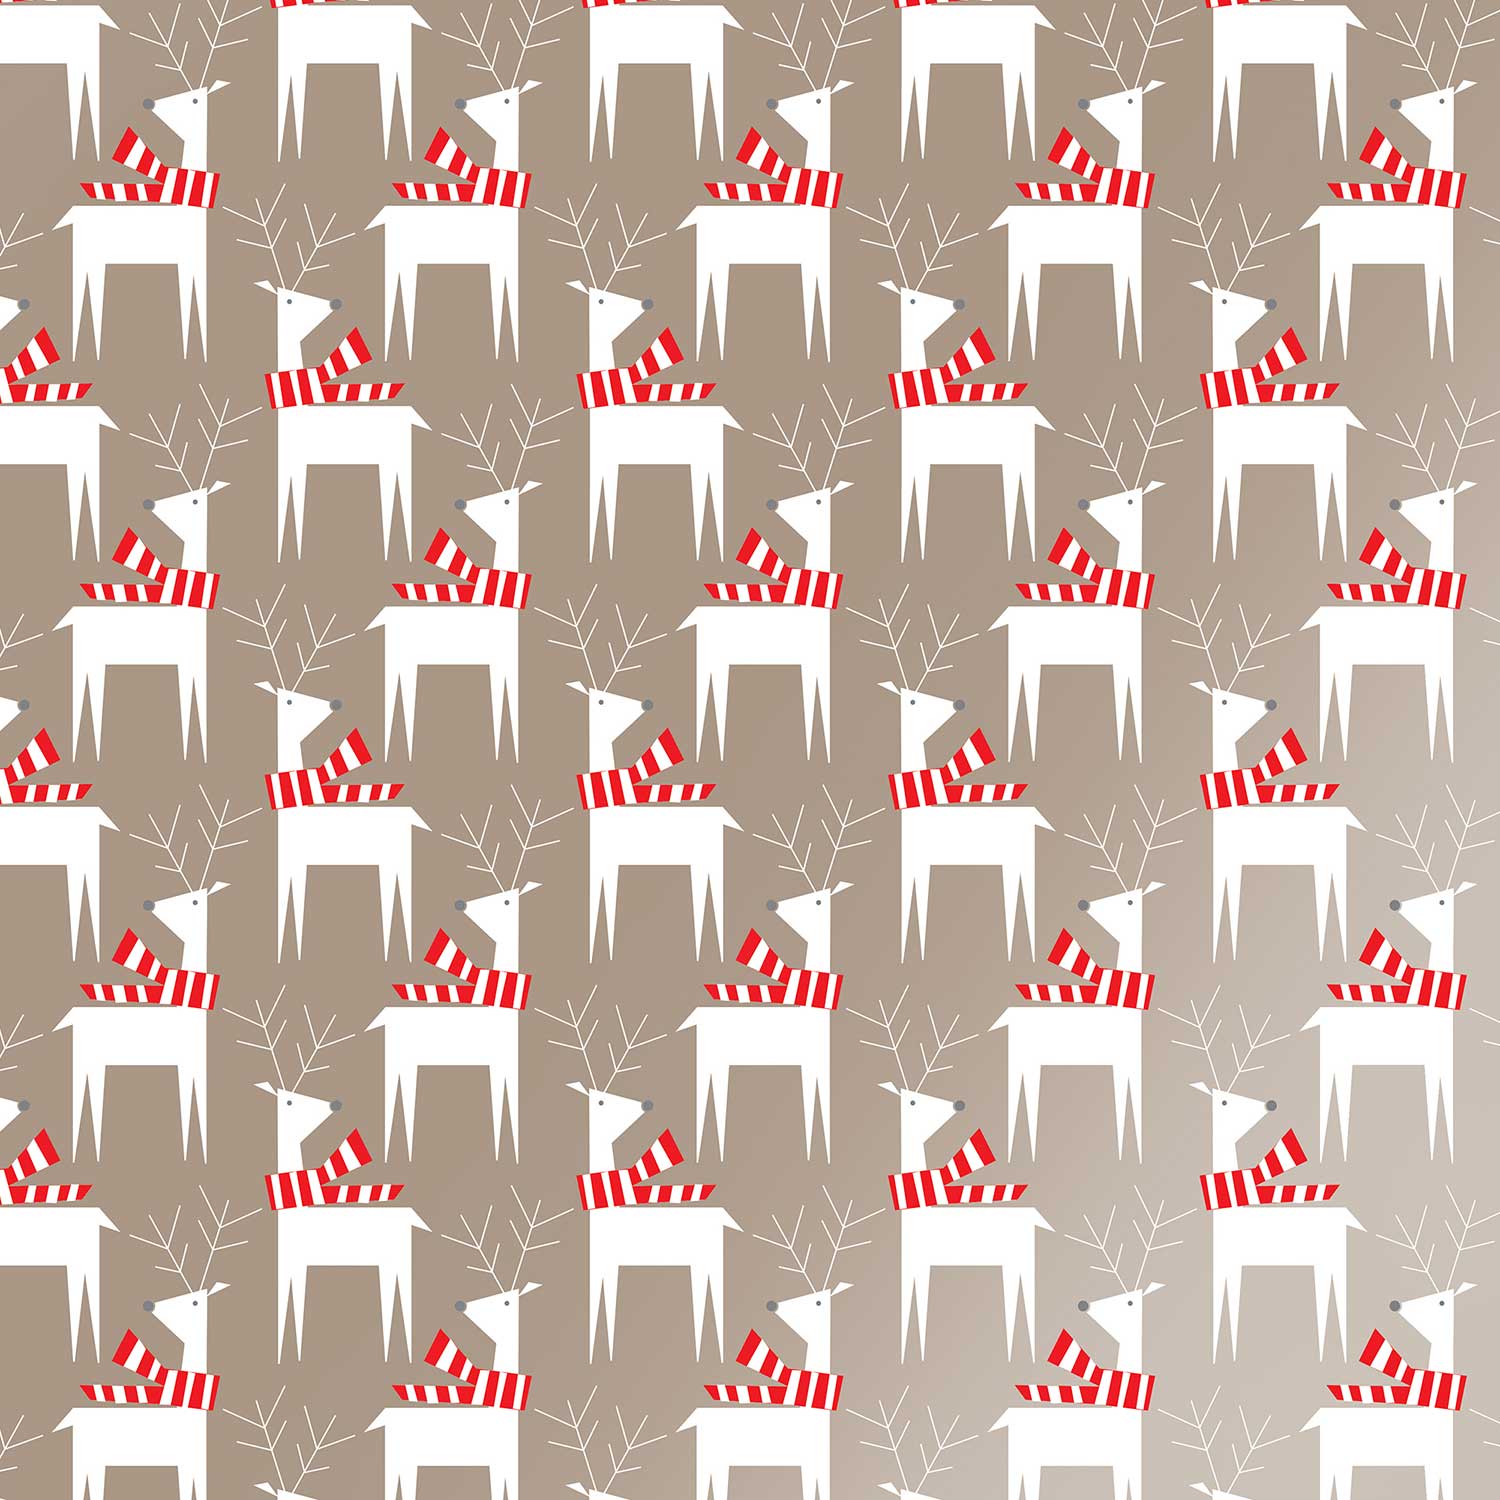 XB627a Champagne Reindeer Christmas Gift Wrapping Paper Swatch 